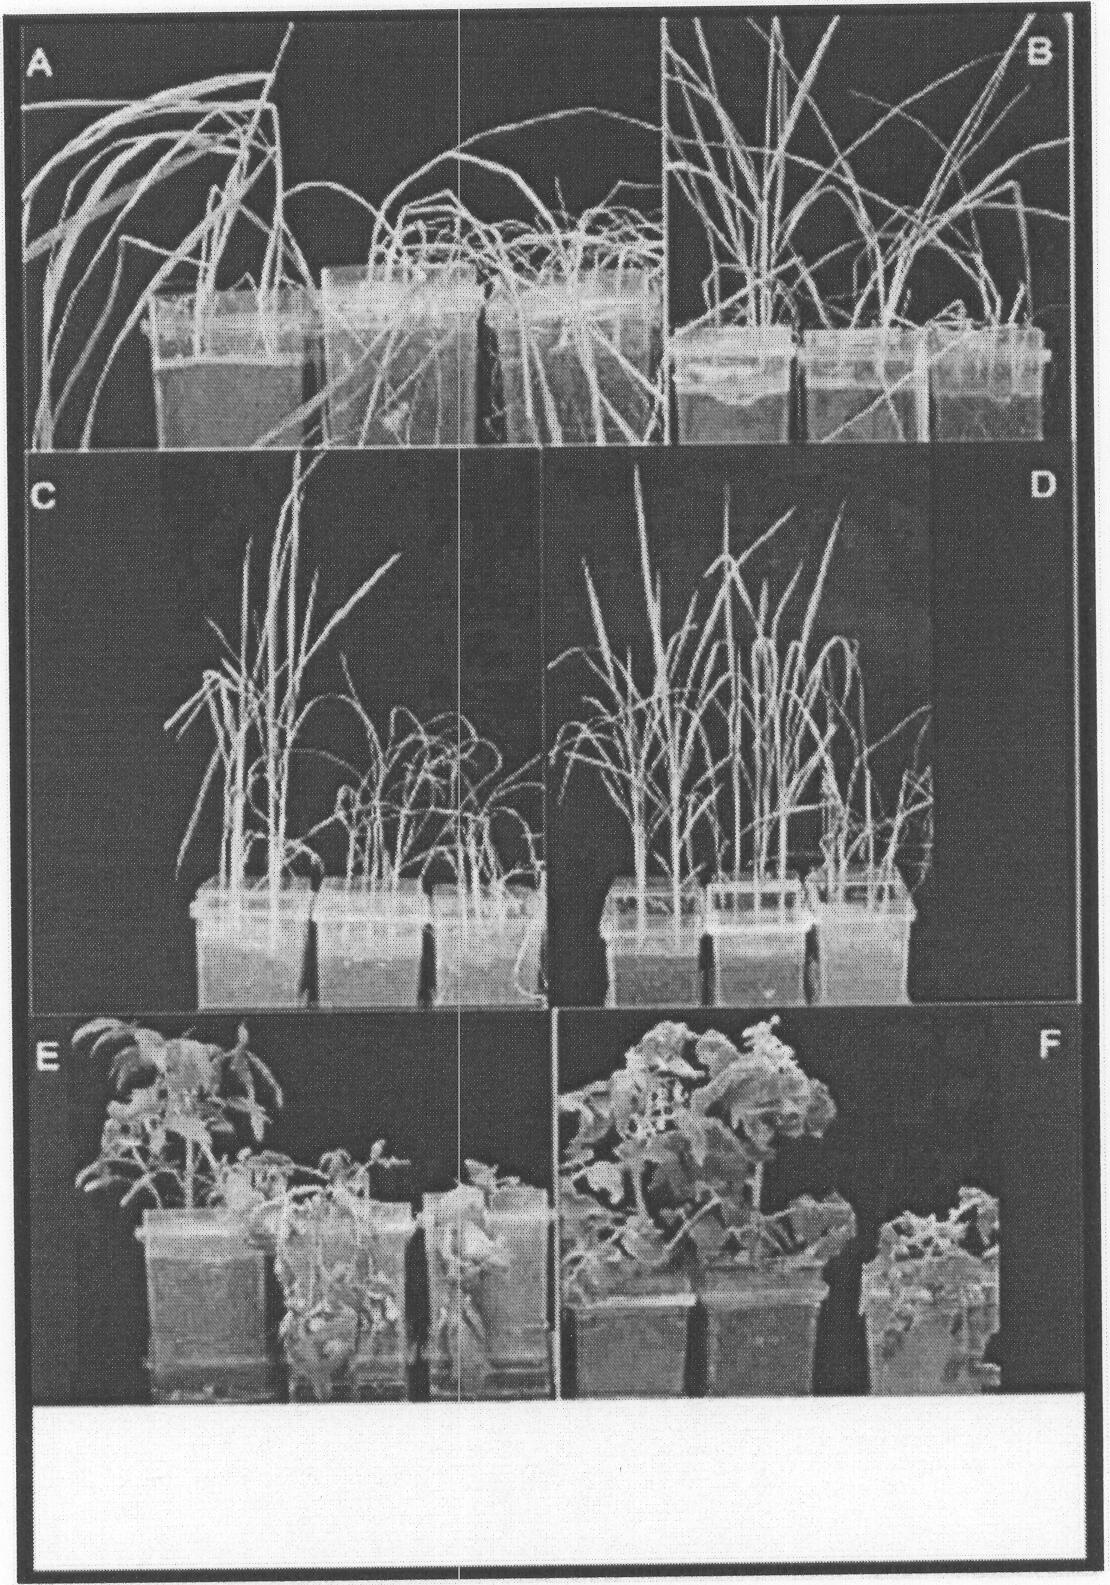 Fungal isolates and their use to confer salinity and drought tolerance in plants